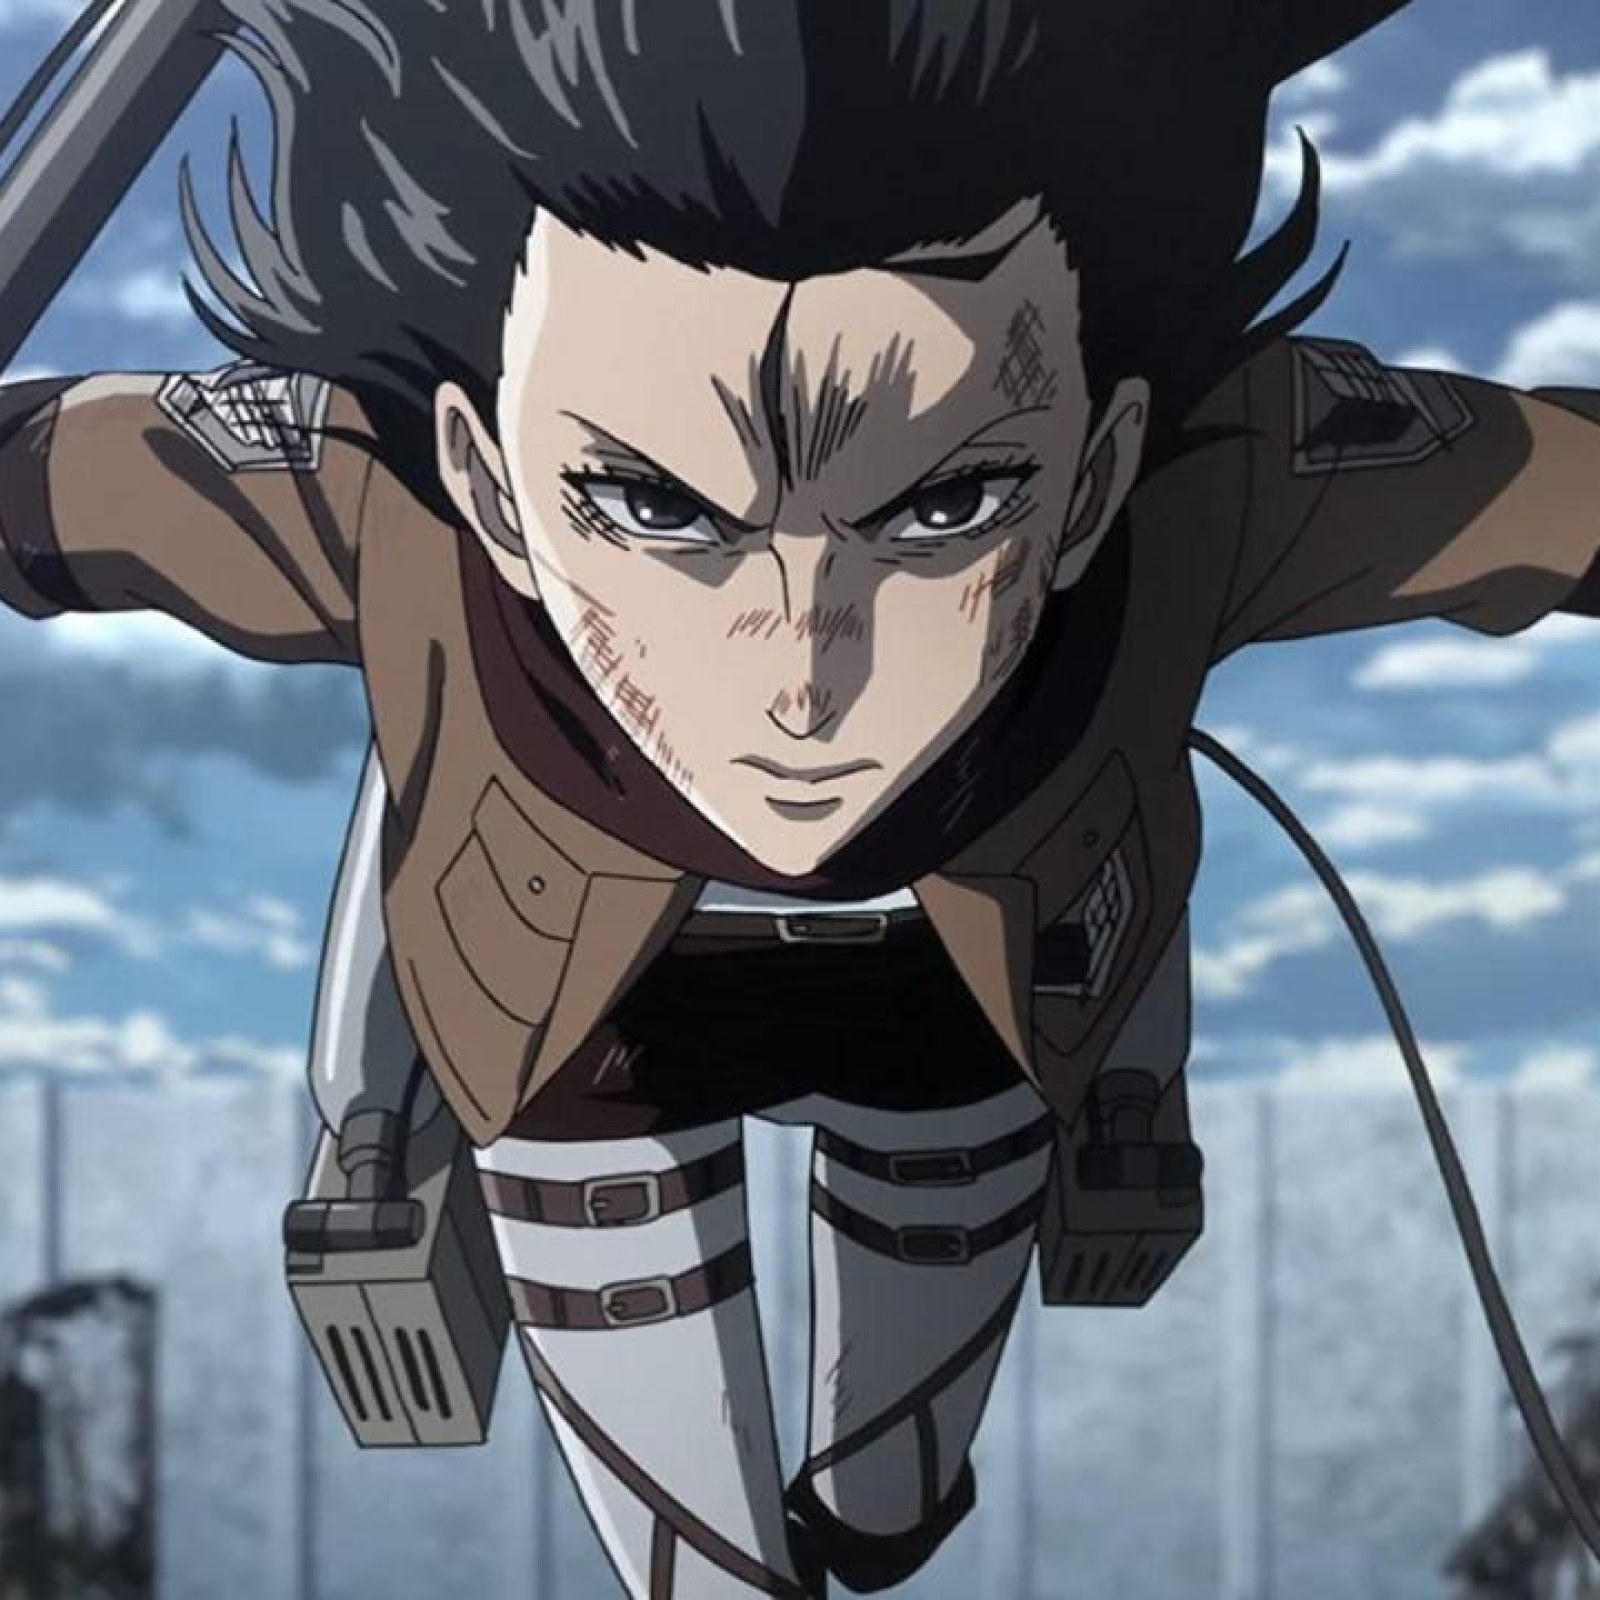 Attack On Titan Season 4 Release Date Has The Final Season Been Delayed